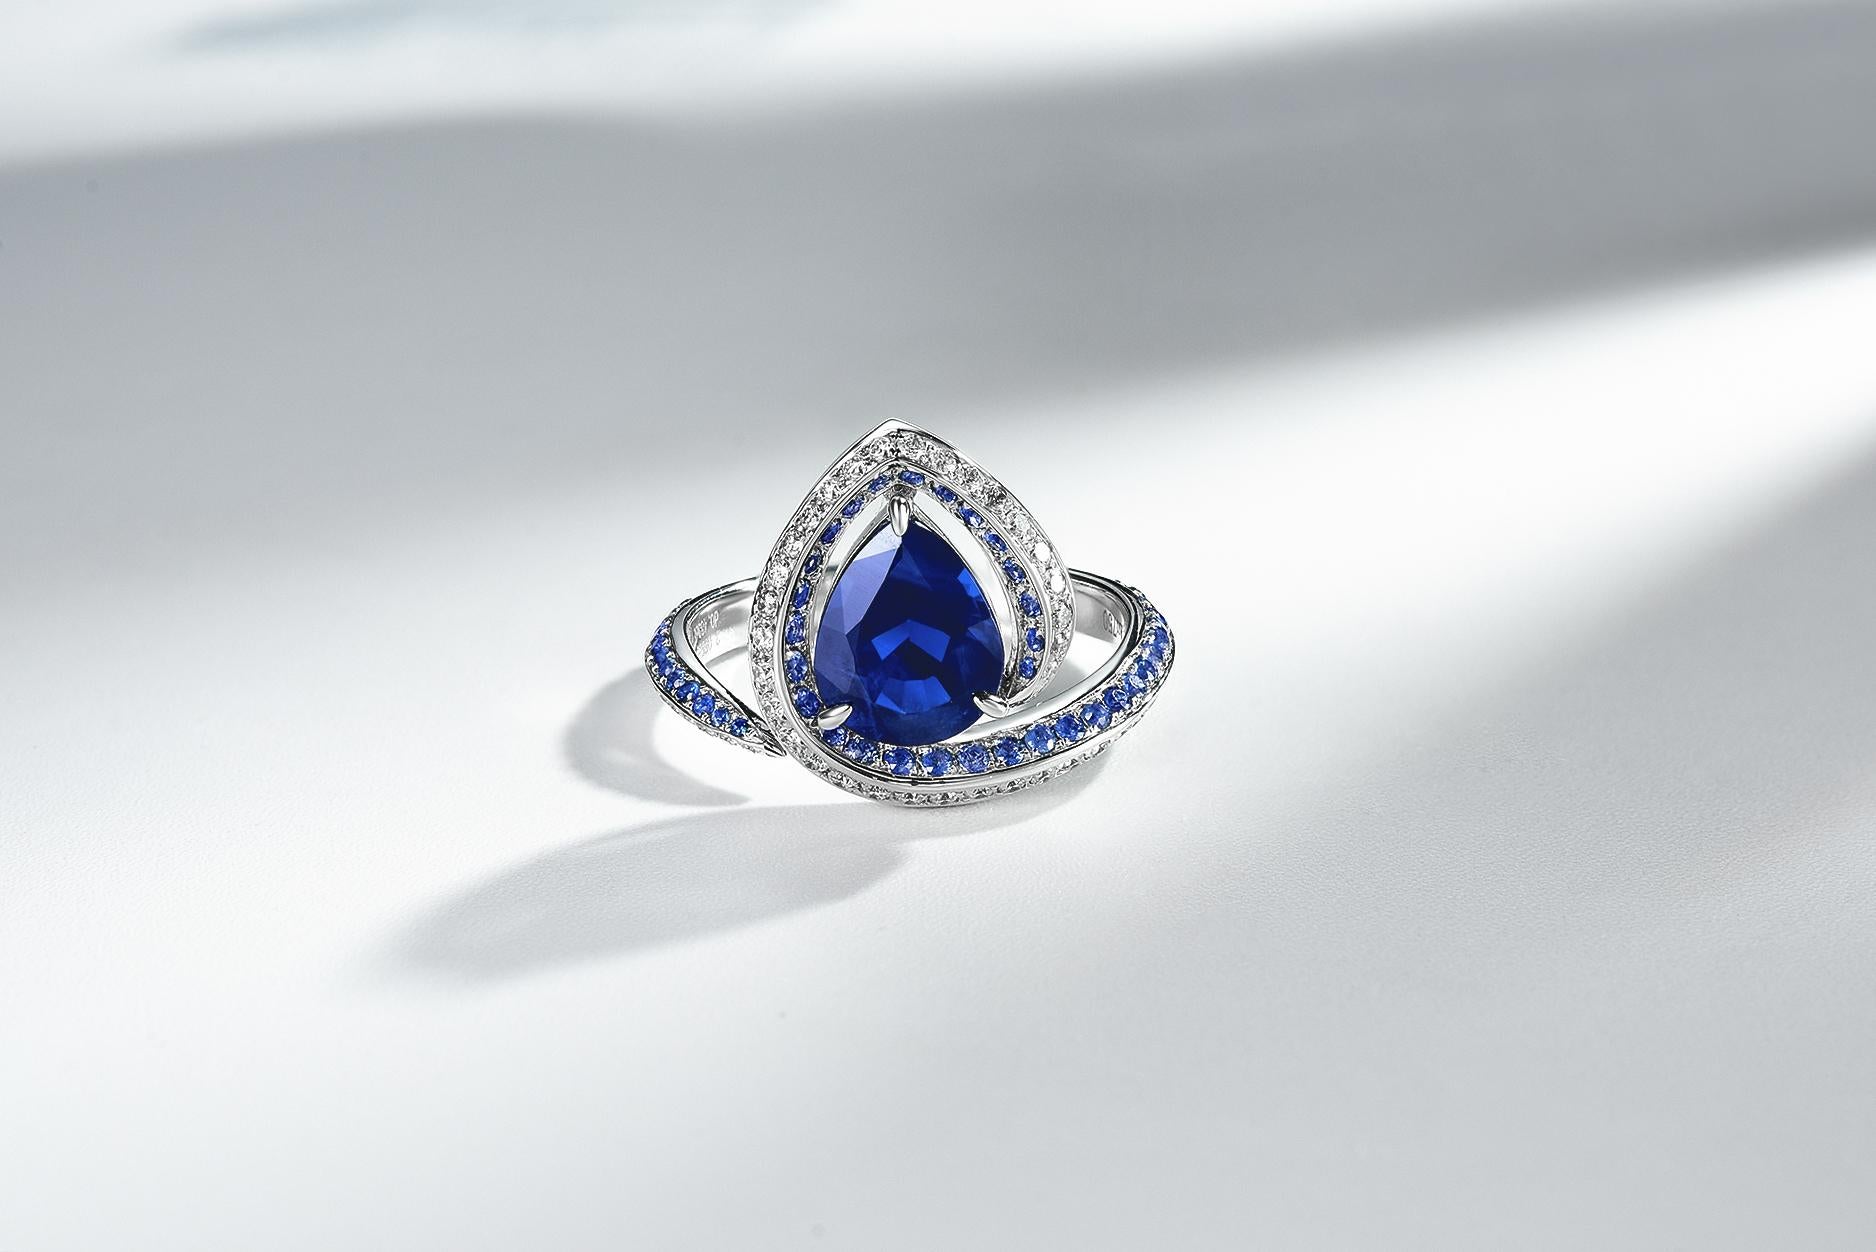 This is a pear shape Blue Sapphire diamond ring, with the sapphire represent the head of a serpent and the ring itself is the body of the serpent encircling the finger. It is a very unique yet bold design as most of the serpent look like design will